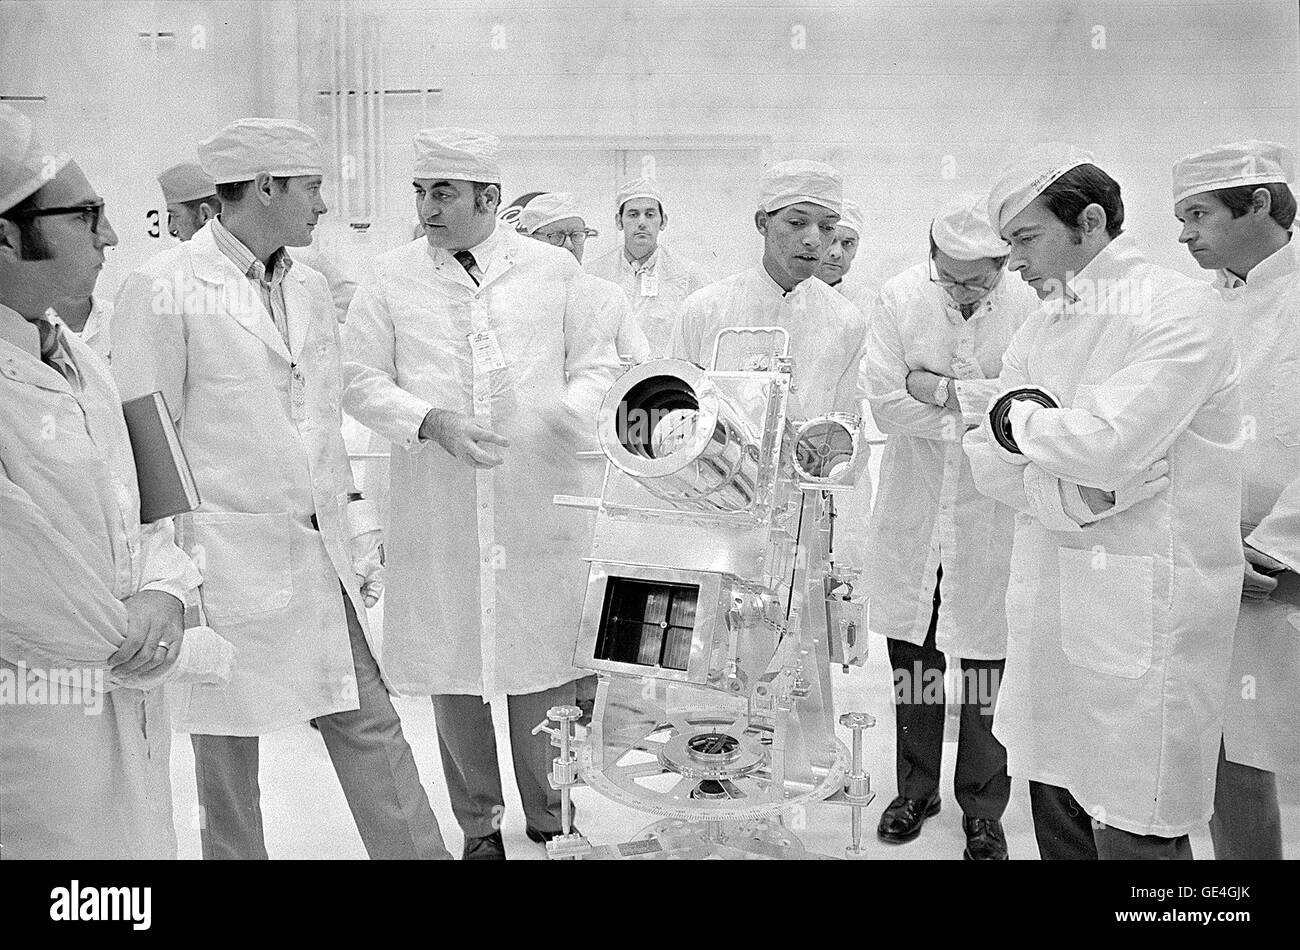 George Carruthers, center, principal investigator for the Lunar Surface Ultraviolet Camera, discusses the instrument with Apollo 16 Commander John Young, right. Carruthers is employed by the Naval Research Lab in Washington, D.C. From left are Lunar Module Pilot Charles Duke and Rocco Petrone, Apollo Program Director. This photograph was taken during an Apollo lunar surface experiments review in the Manned Spacecraft Operations Building at the Kennedy Space Center.   Image # : 71P-0544 Date: November 12, 1971 Stock Photo